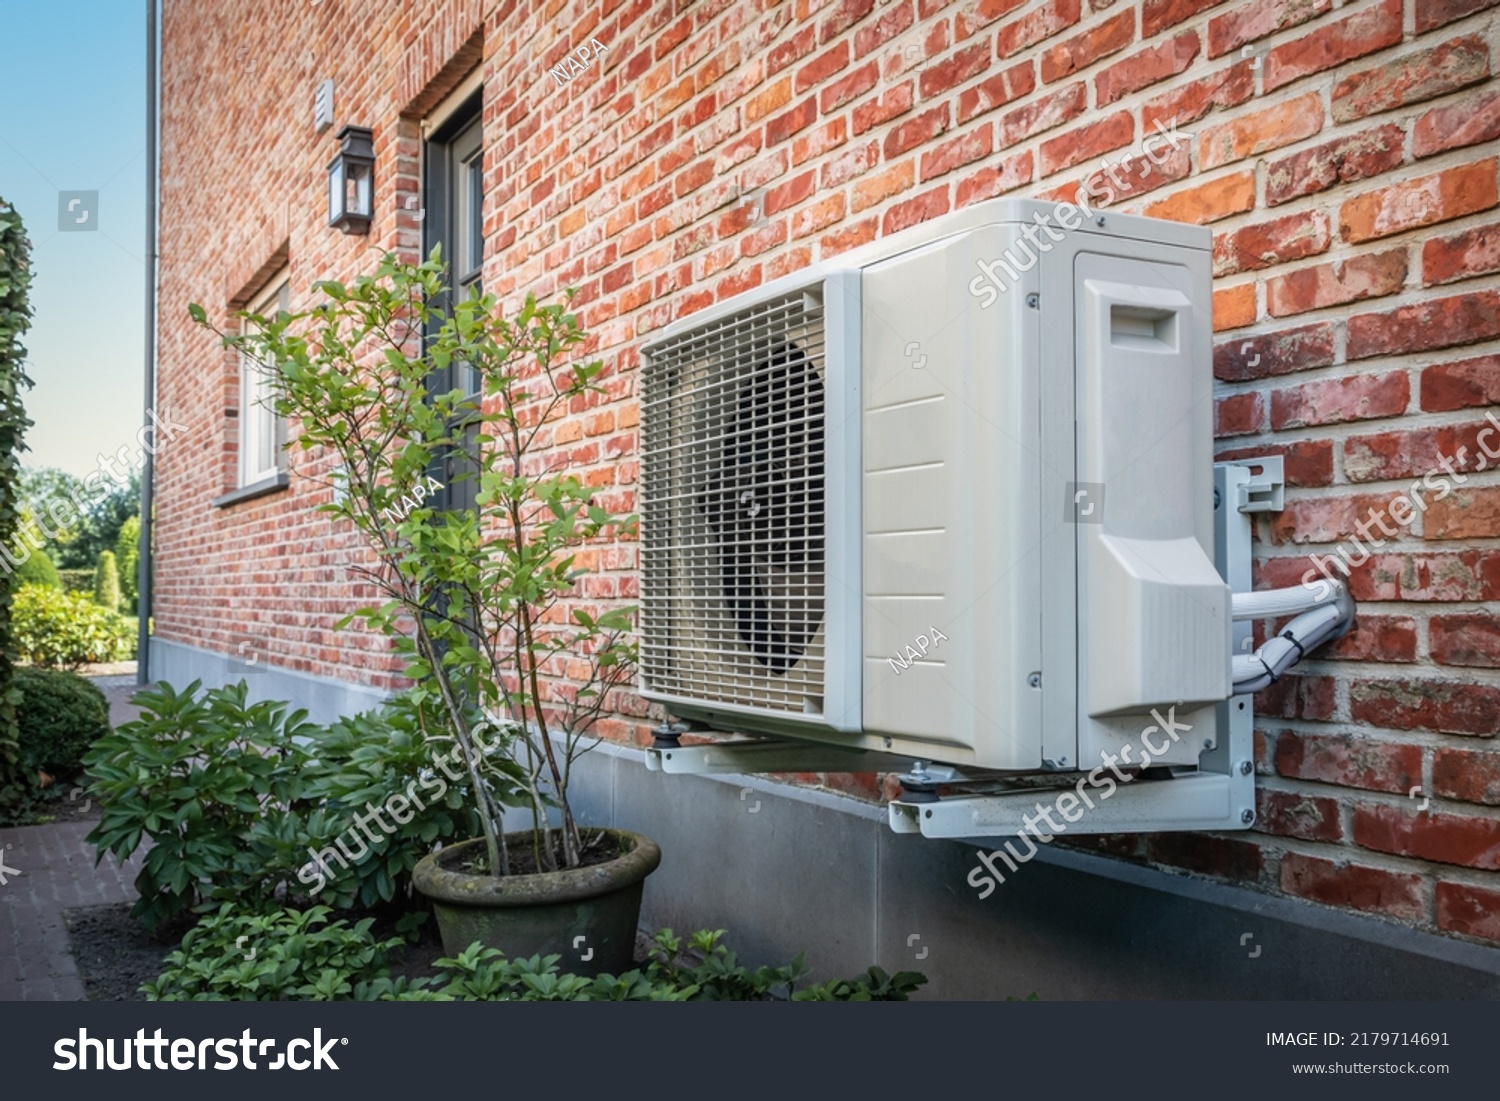 Air to air heat pump for cooling or heating the home. Outdoor unit powered by renewable energy. #2179714691